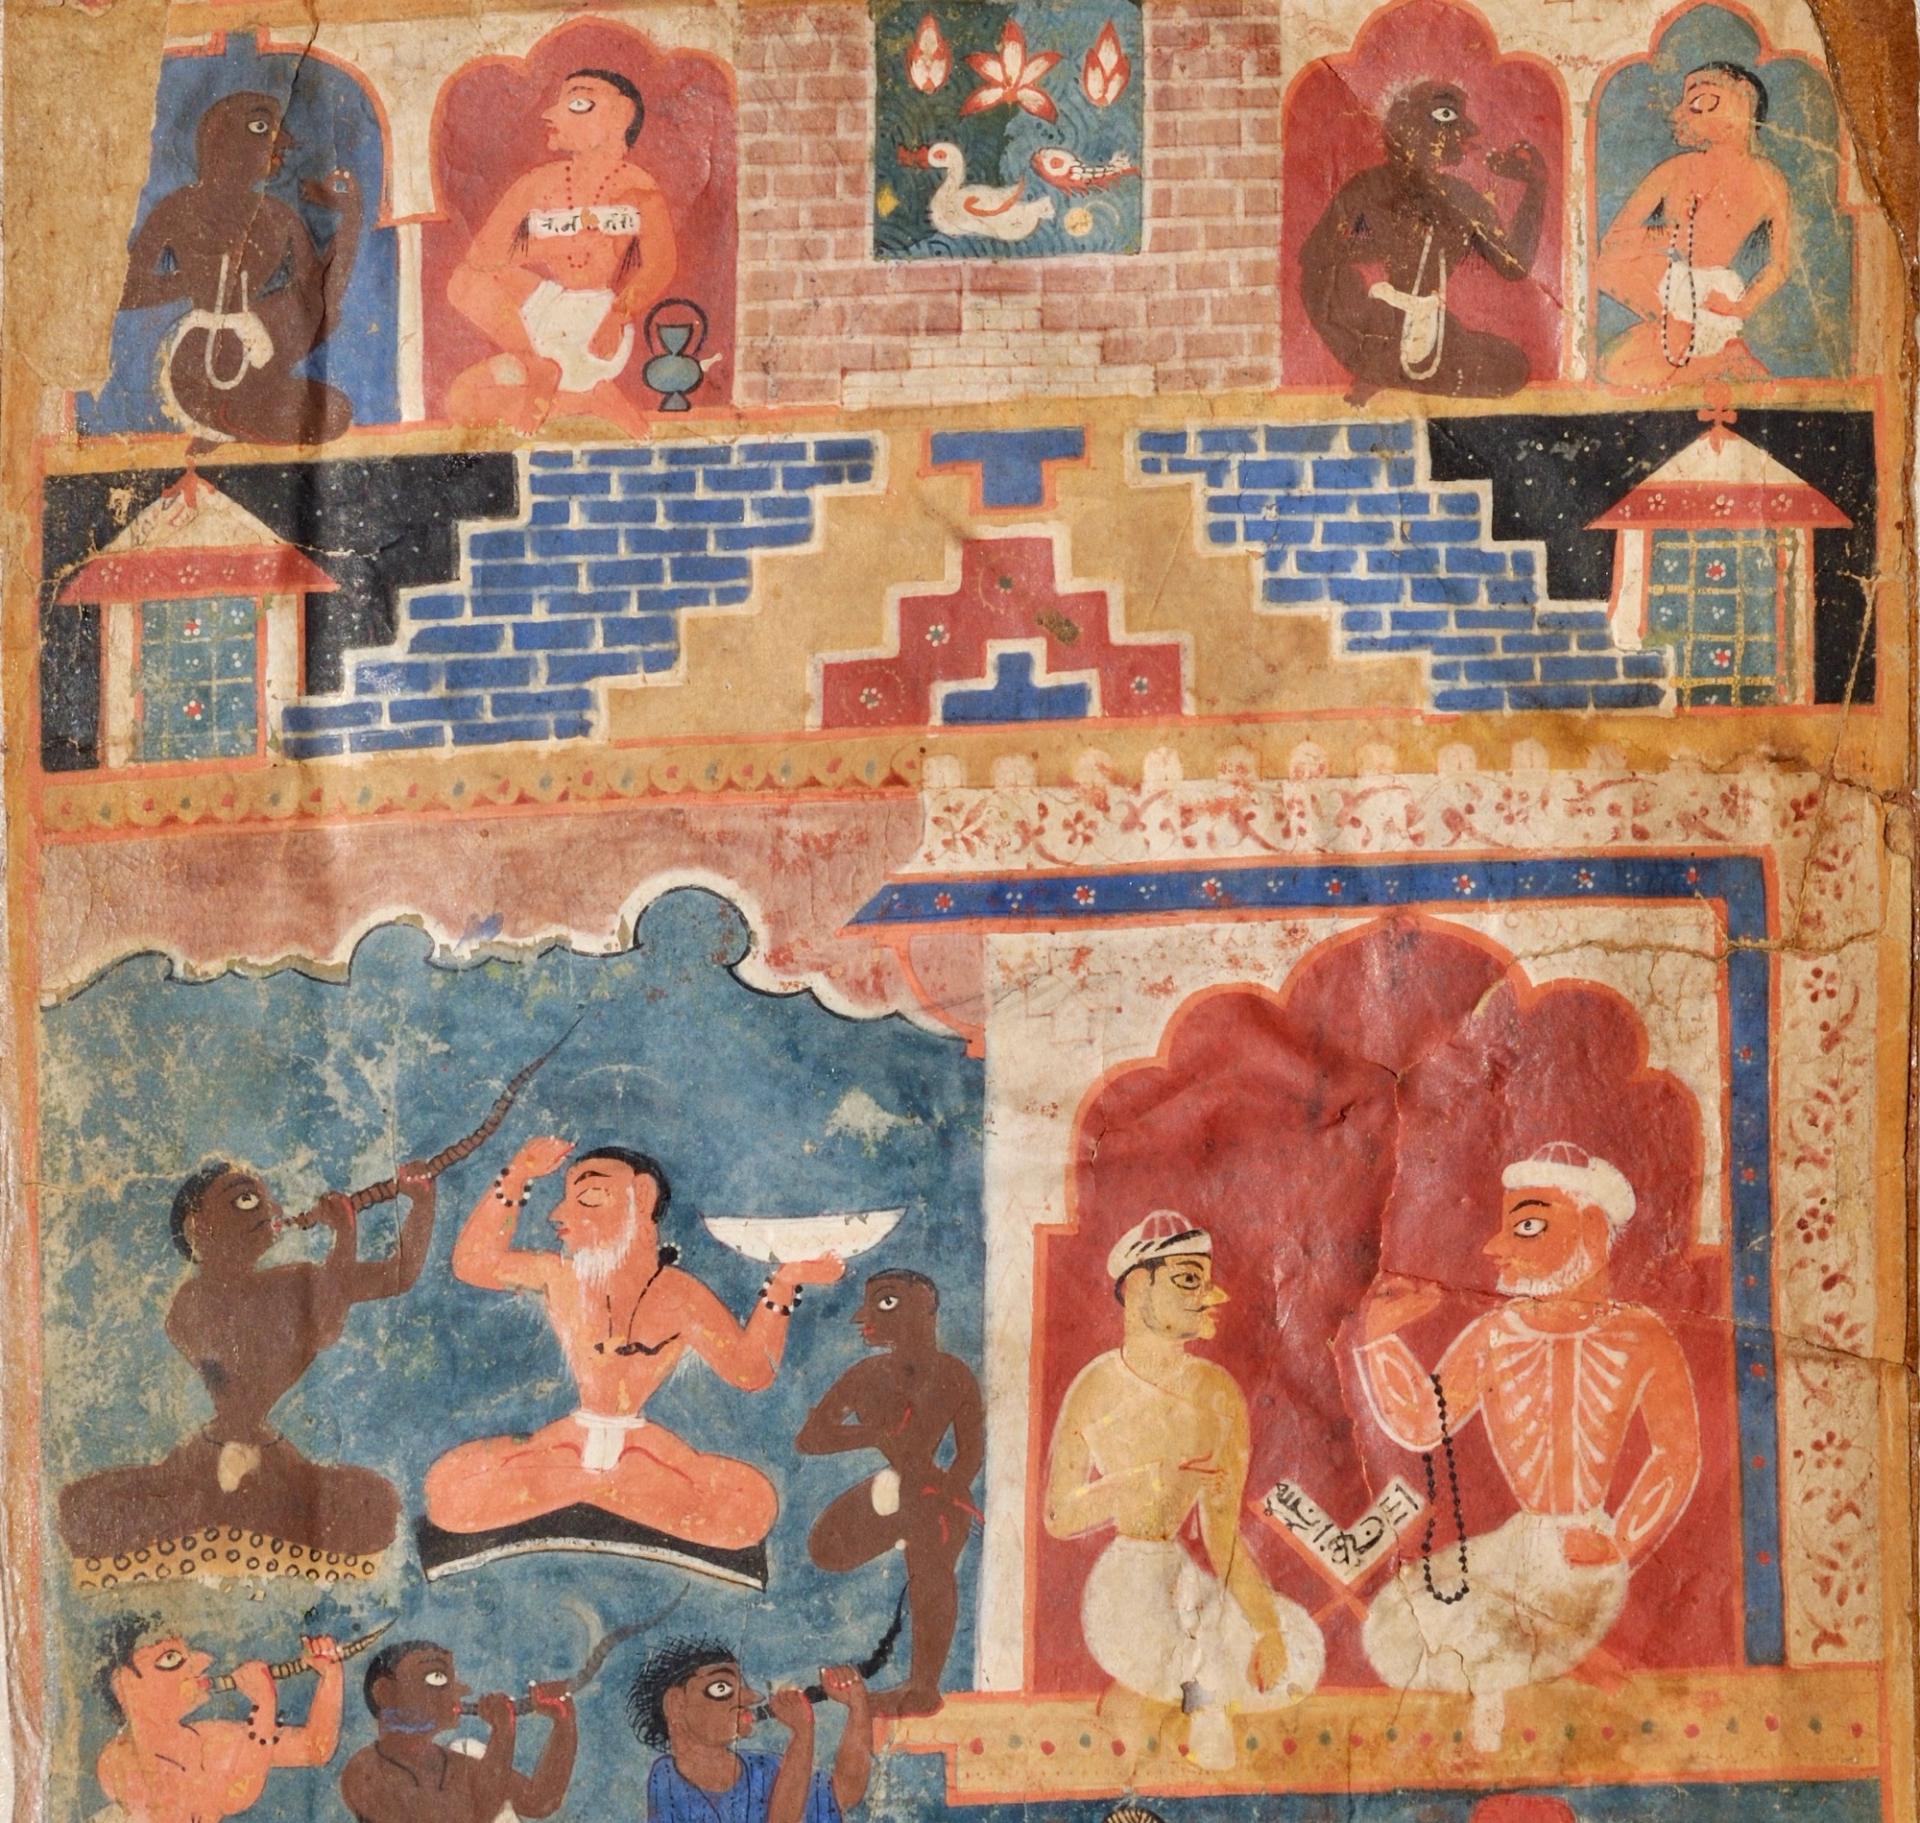 Detail showing Arabic script of Chandayan on a bookstand in the author portrait in bottom right, and a yogi shown with a mantra in kaithi script in the top left. Images of text pages available here. Reproduced with permission of the Government Museum and Art Gallery, Chandigarh, K-7-30-H. 